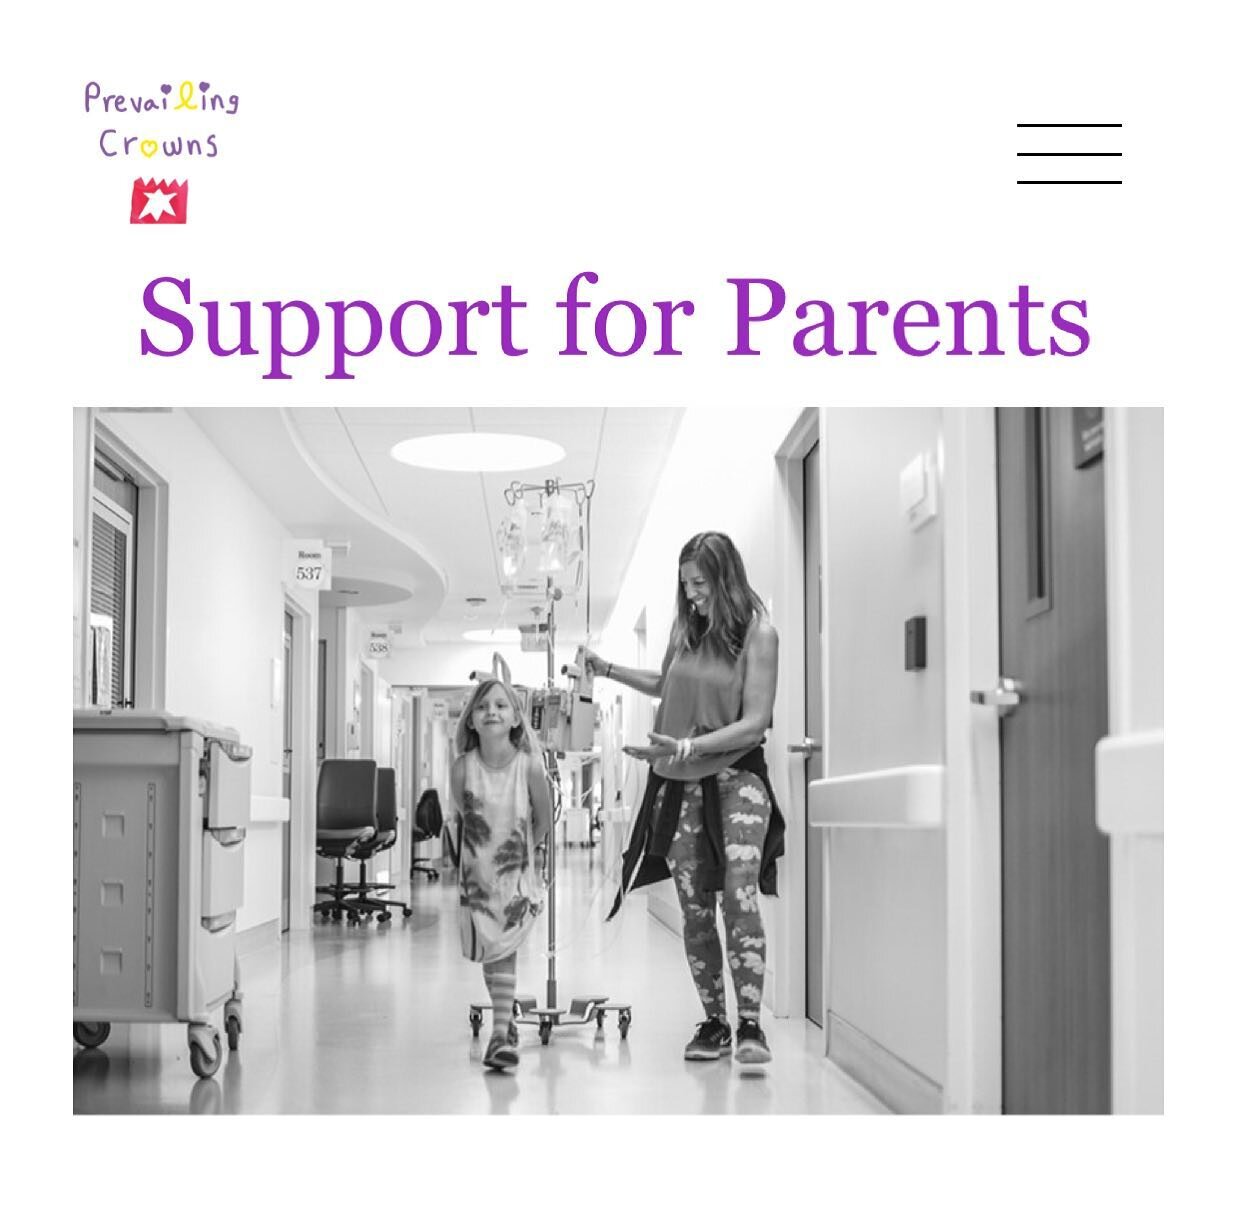 We&rsquo;re excited to share highlights of our new website! Today&rsquo;s Spotlight: Support for Parents (Link in bio)  Although Prevailing Crowns&rsquo; focus is on providing Crowns Kits for children with cancer, just as important is our mission to 